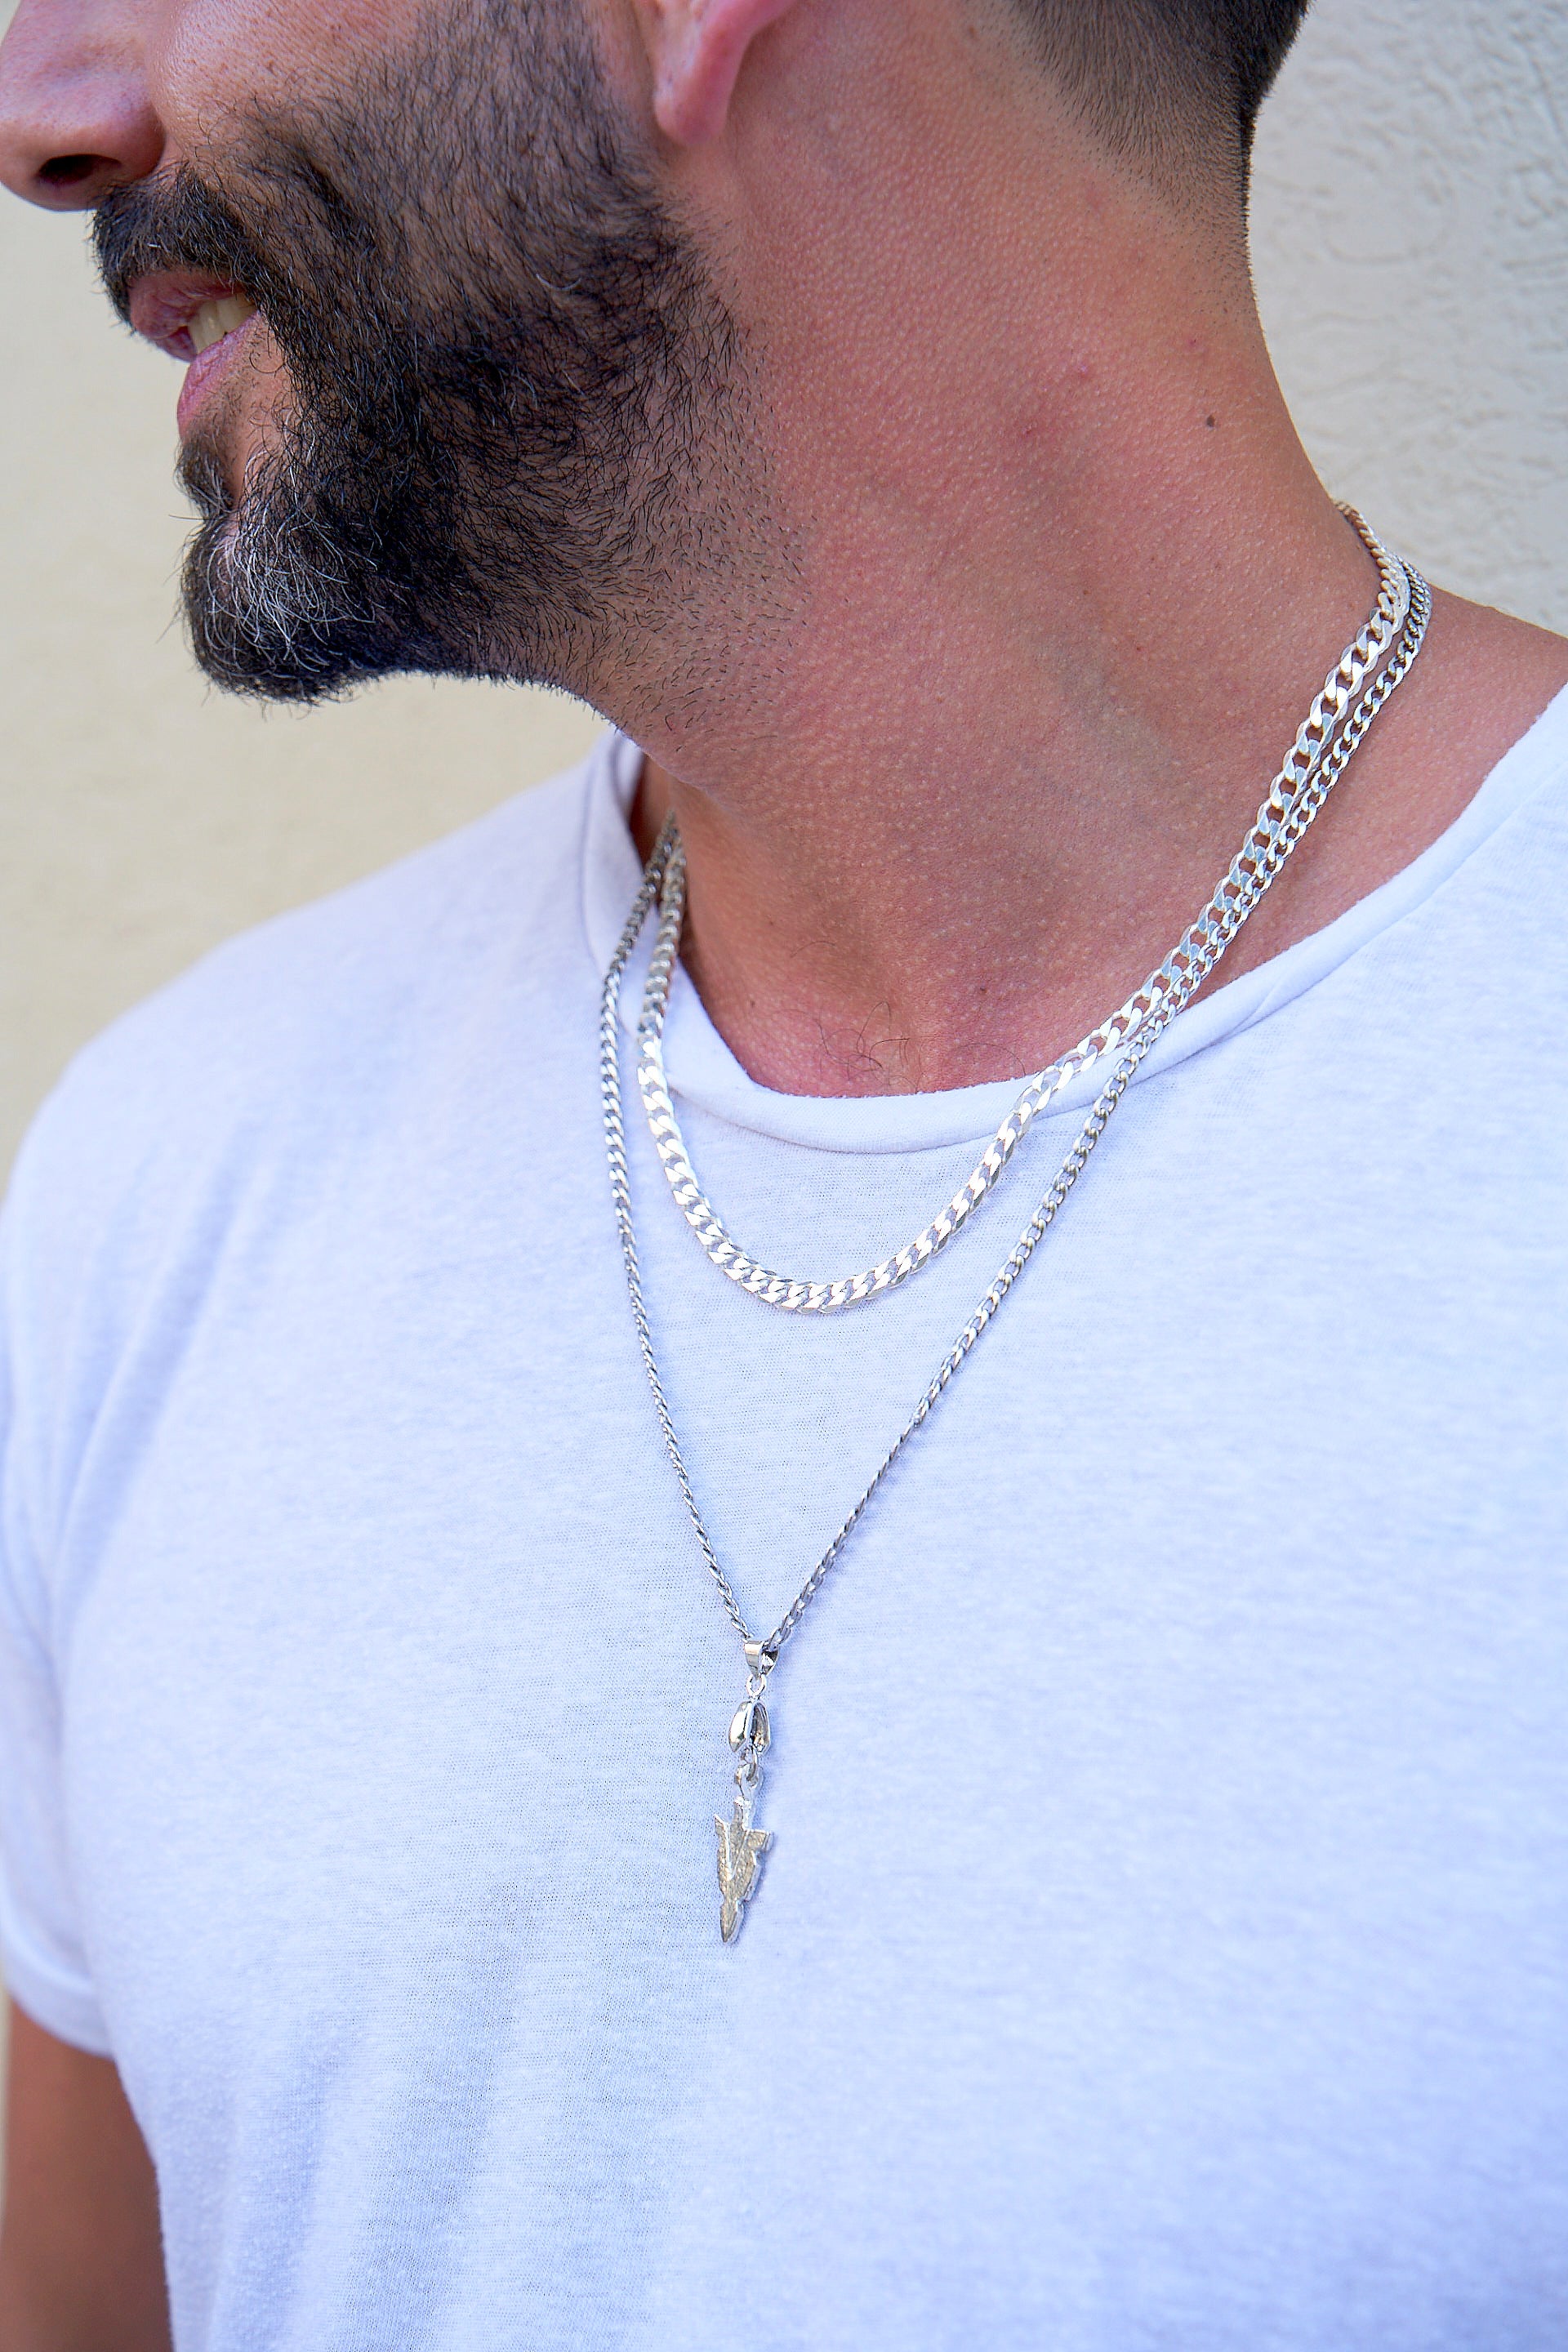 Leon | Delicate stainless steel gourmet necklace combined with a silver pendant of a dagger